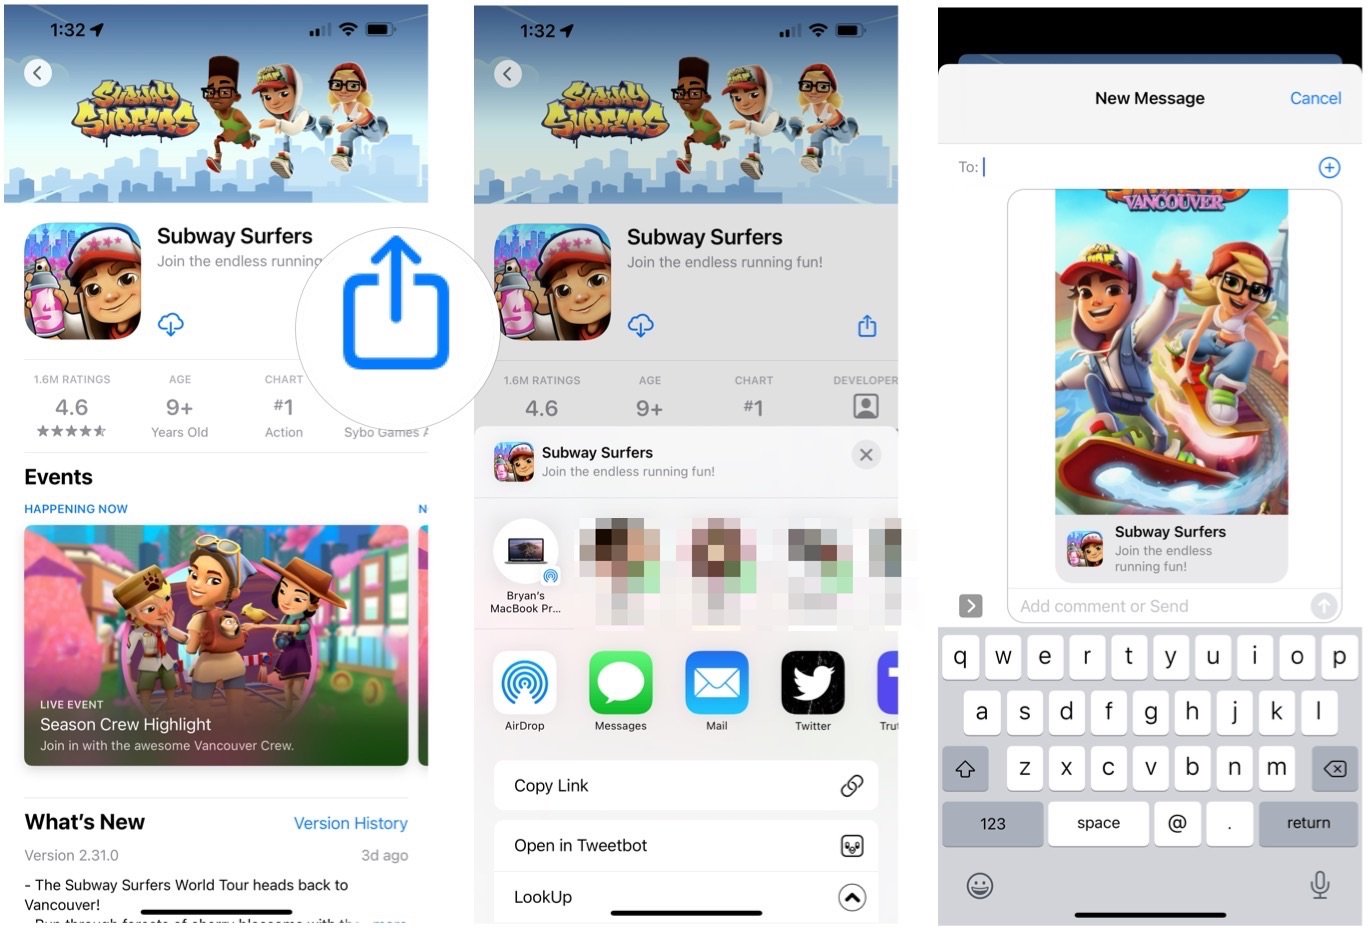 To share content from the App Store, launch the Store, then find the app you wish to share. Tap the share button, then tap a sharing option from the share sheet.